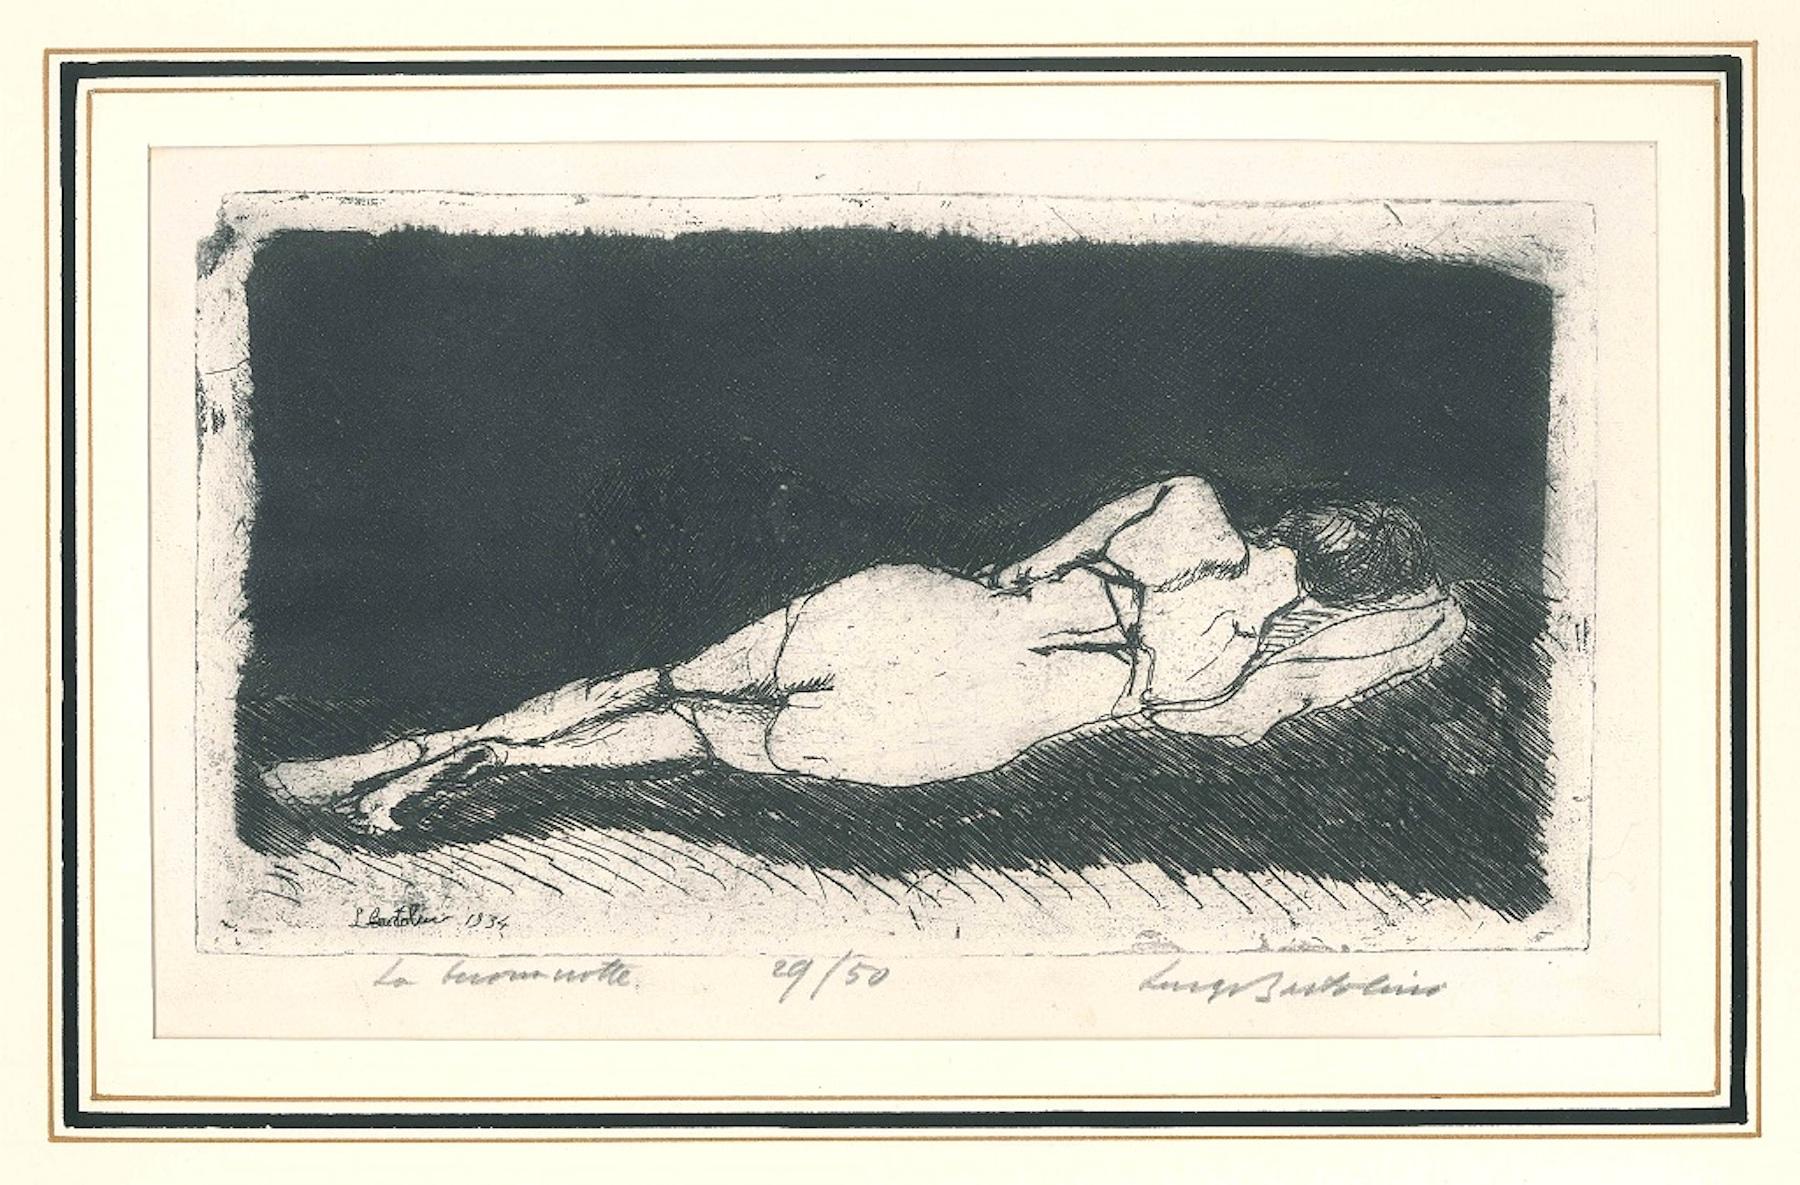 Image dimensions: 13 x 24.5 cm.

This is an original etching realized by Luigi Bartolini in 1934. Hand signed in pencil on the lower right and titled on the lower left. Numbered on lower center. Edition of 50 prints. Signed and dated on plate.

Good